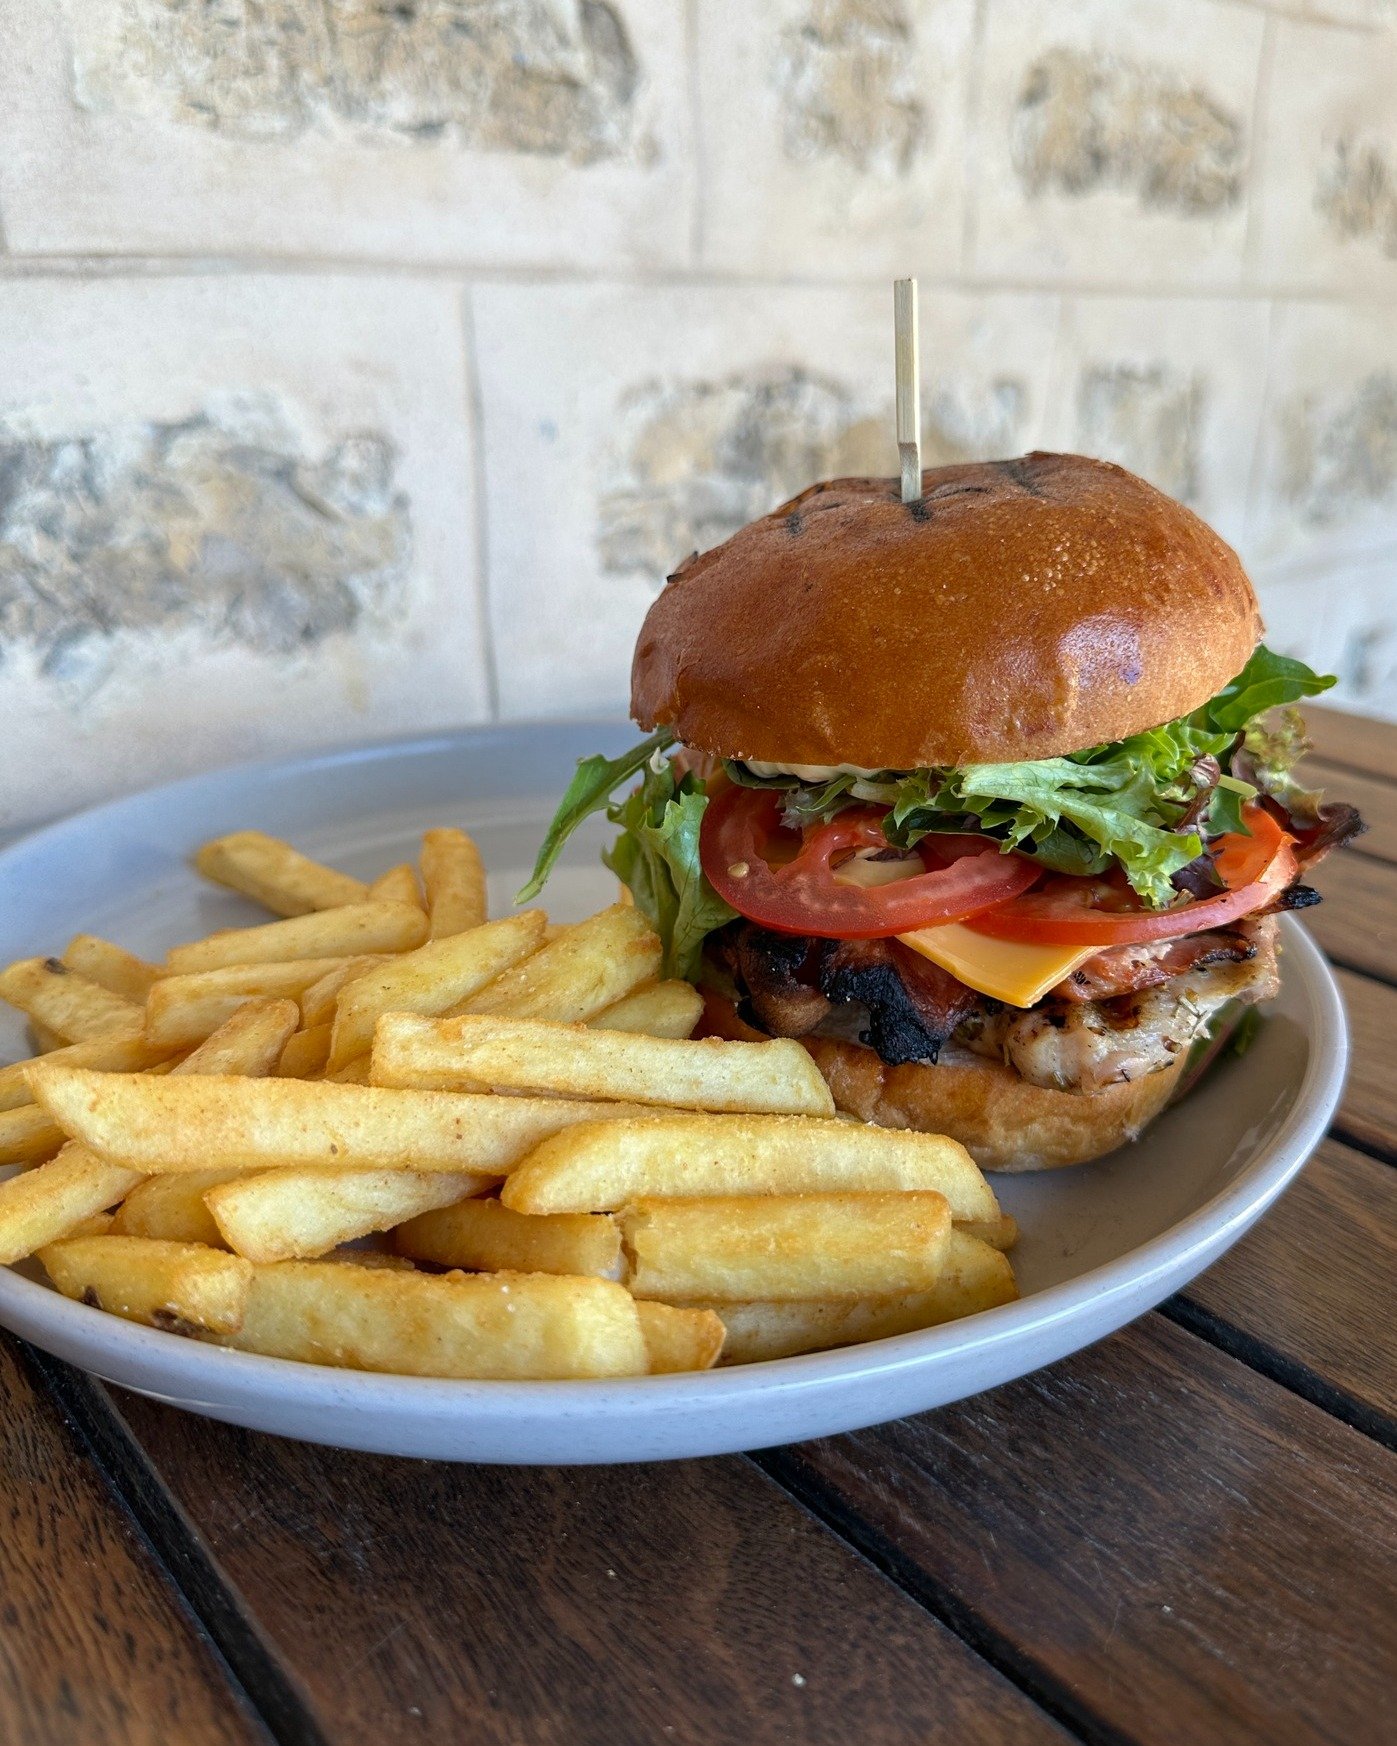 🍔 $20 BURGER THURSDAY! 🍔

Join us tonight for Burgers for just $20! Served with fires and onion rings 🤤

👉 Chicken BLAT
👉 Pulled Pork Burger
👉 Pulled Beef Burger
👉 Chickpea Burger

Book quick at www.yankalillahotel.com.au